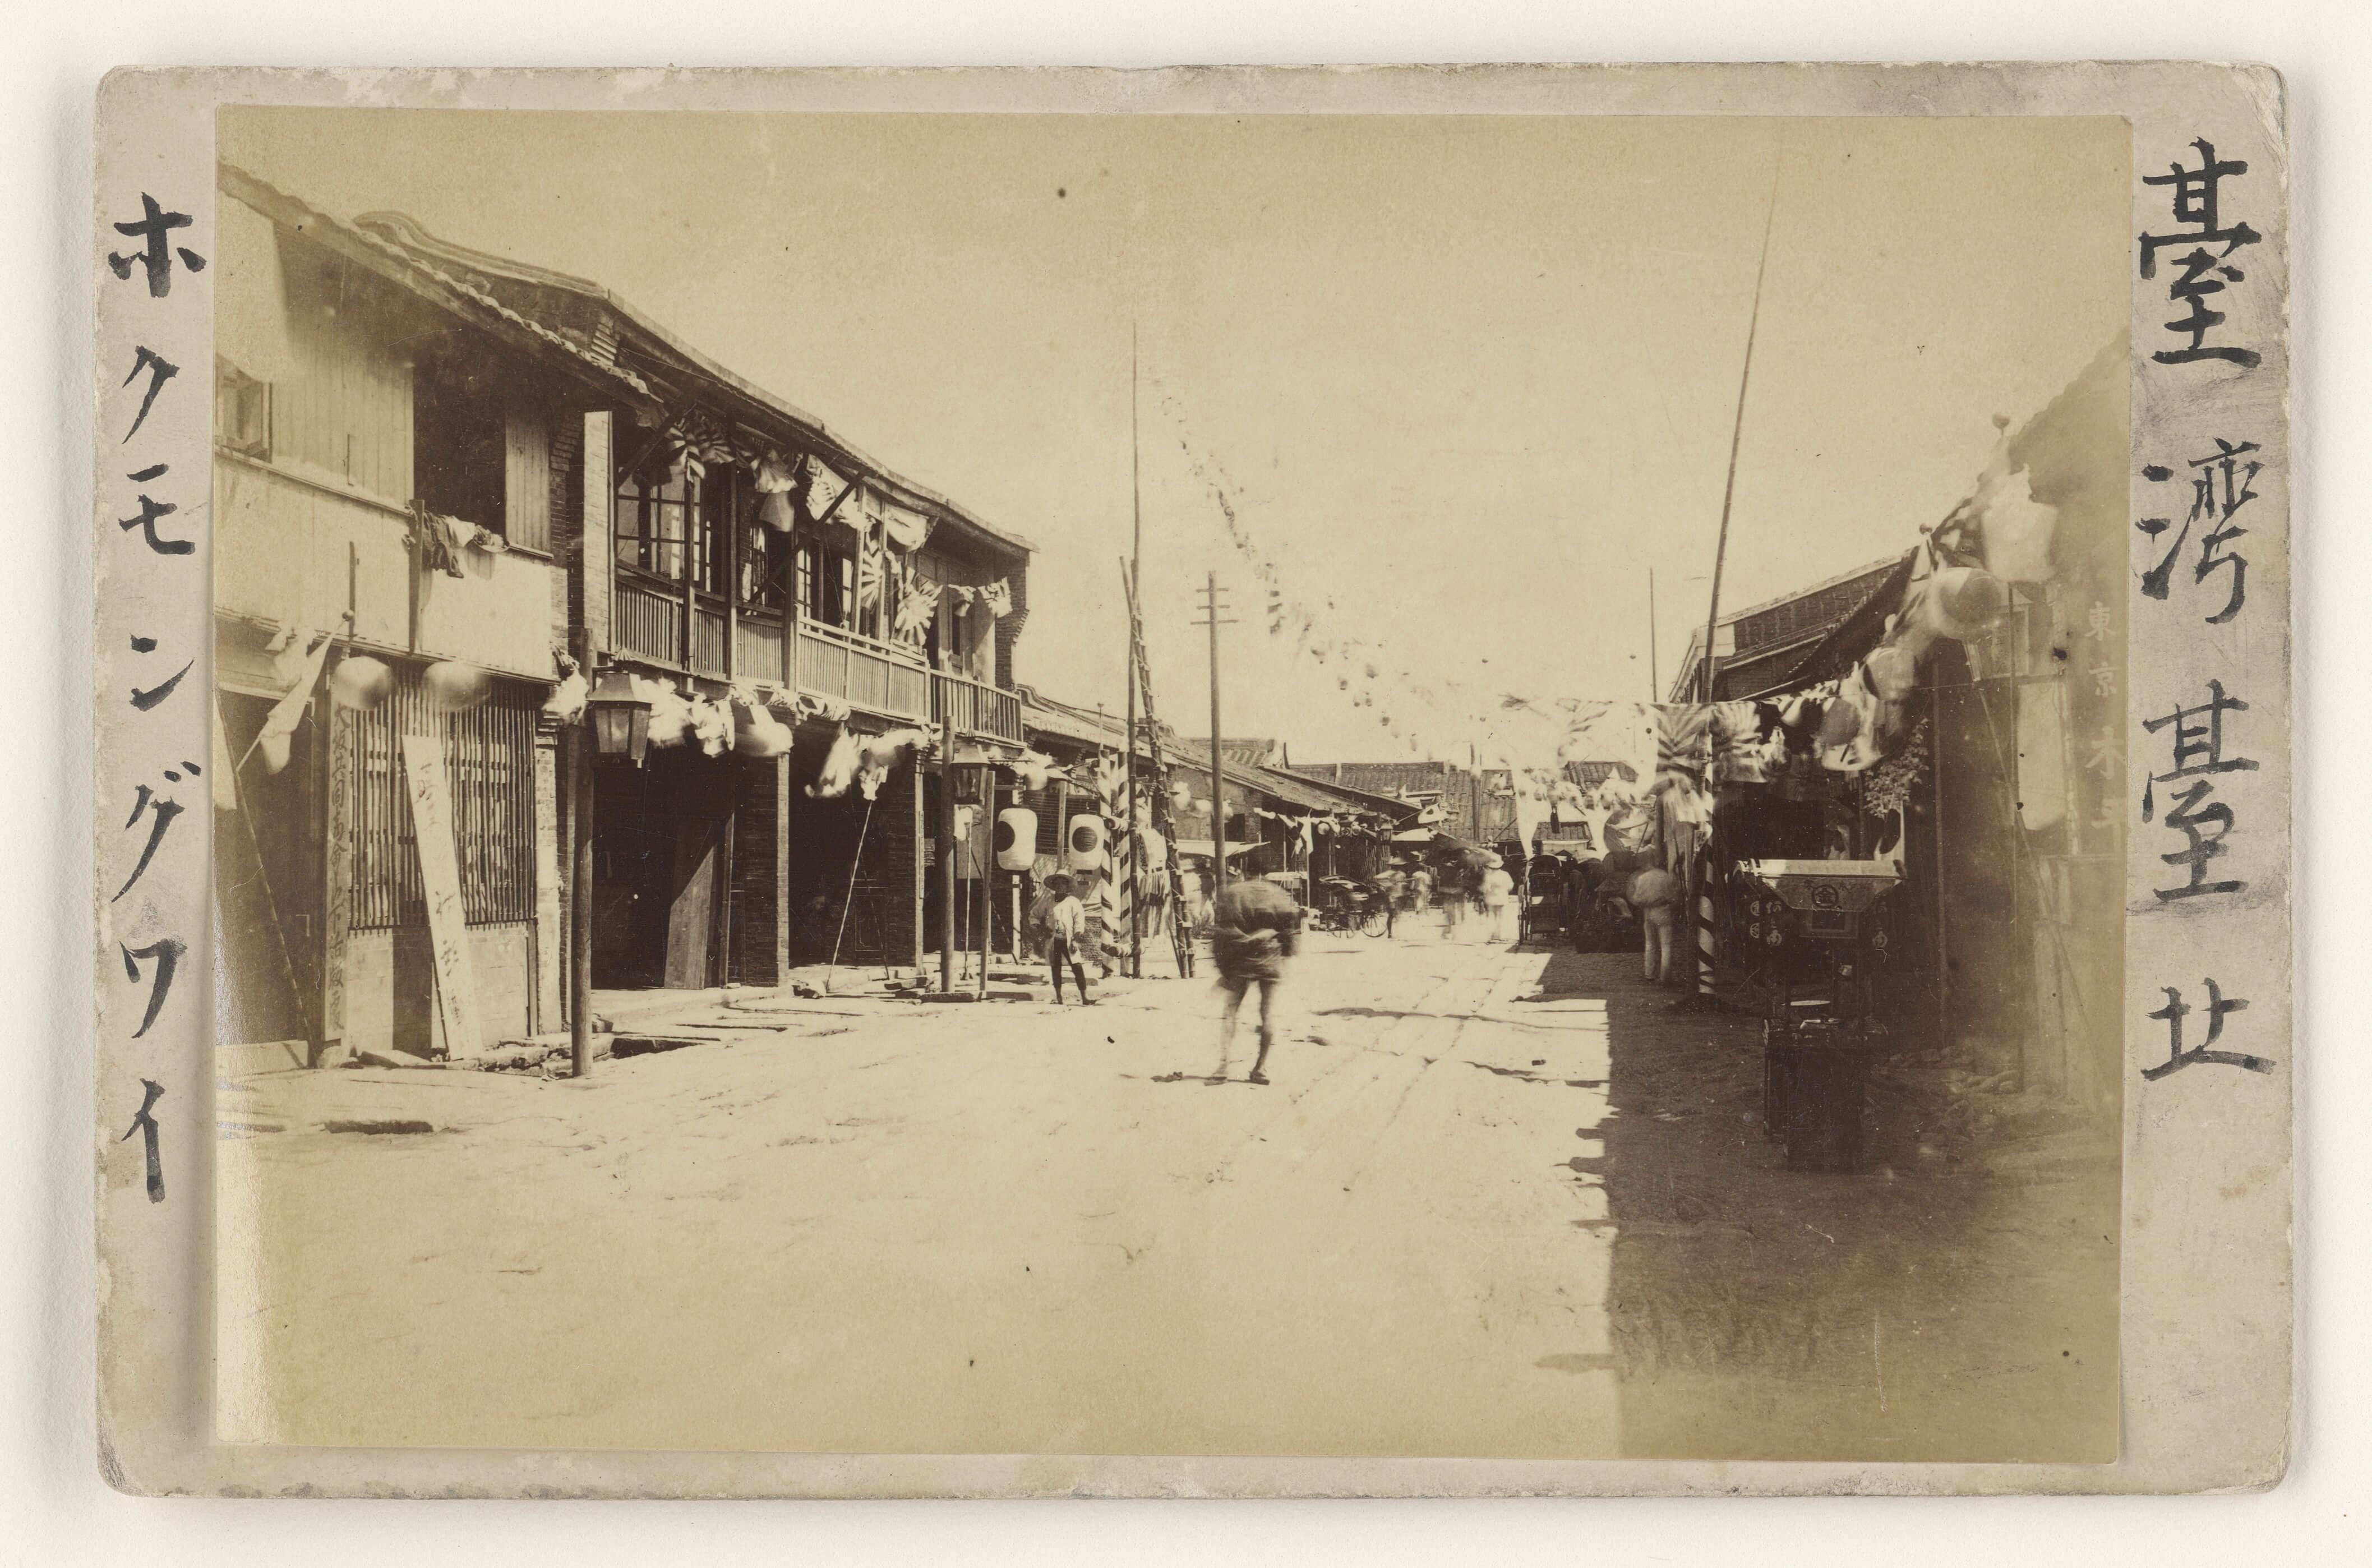 NATIONAL CENTER OF PHOTOGRAPHY AND IMAGES-Japanese Colonialism and 